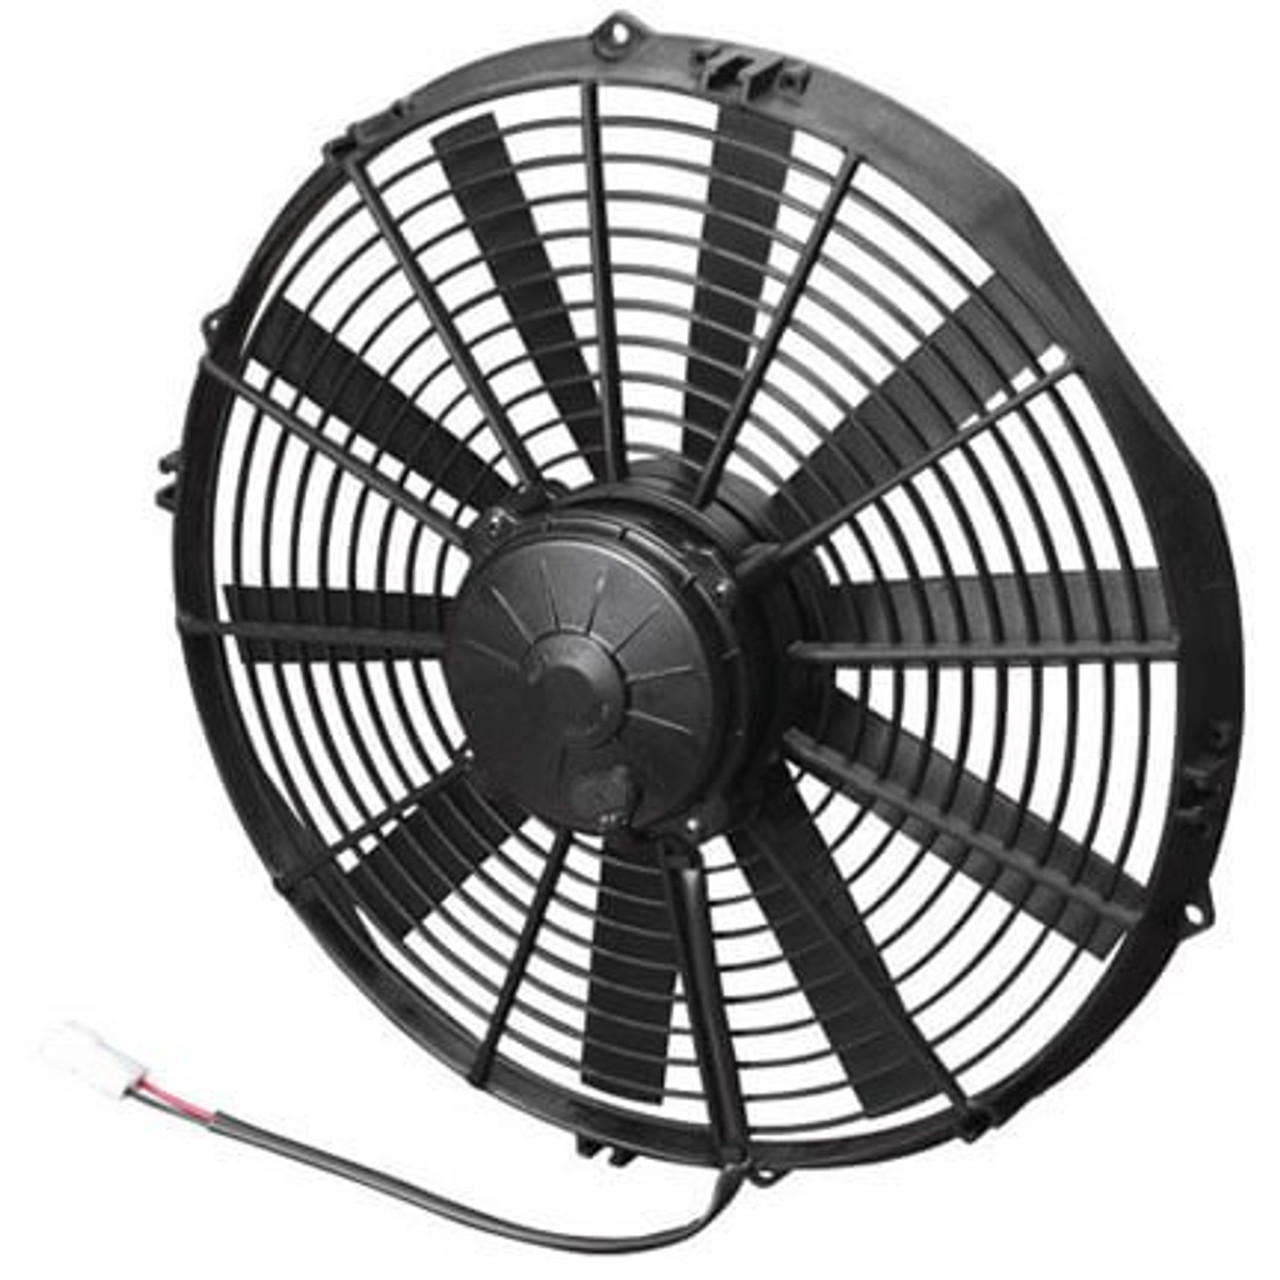 30102055 SPAL® 14" Electric Fan Pusher 1652 CFM 10 Straight blades